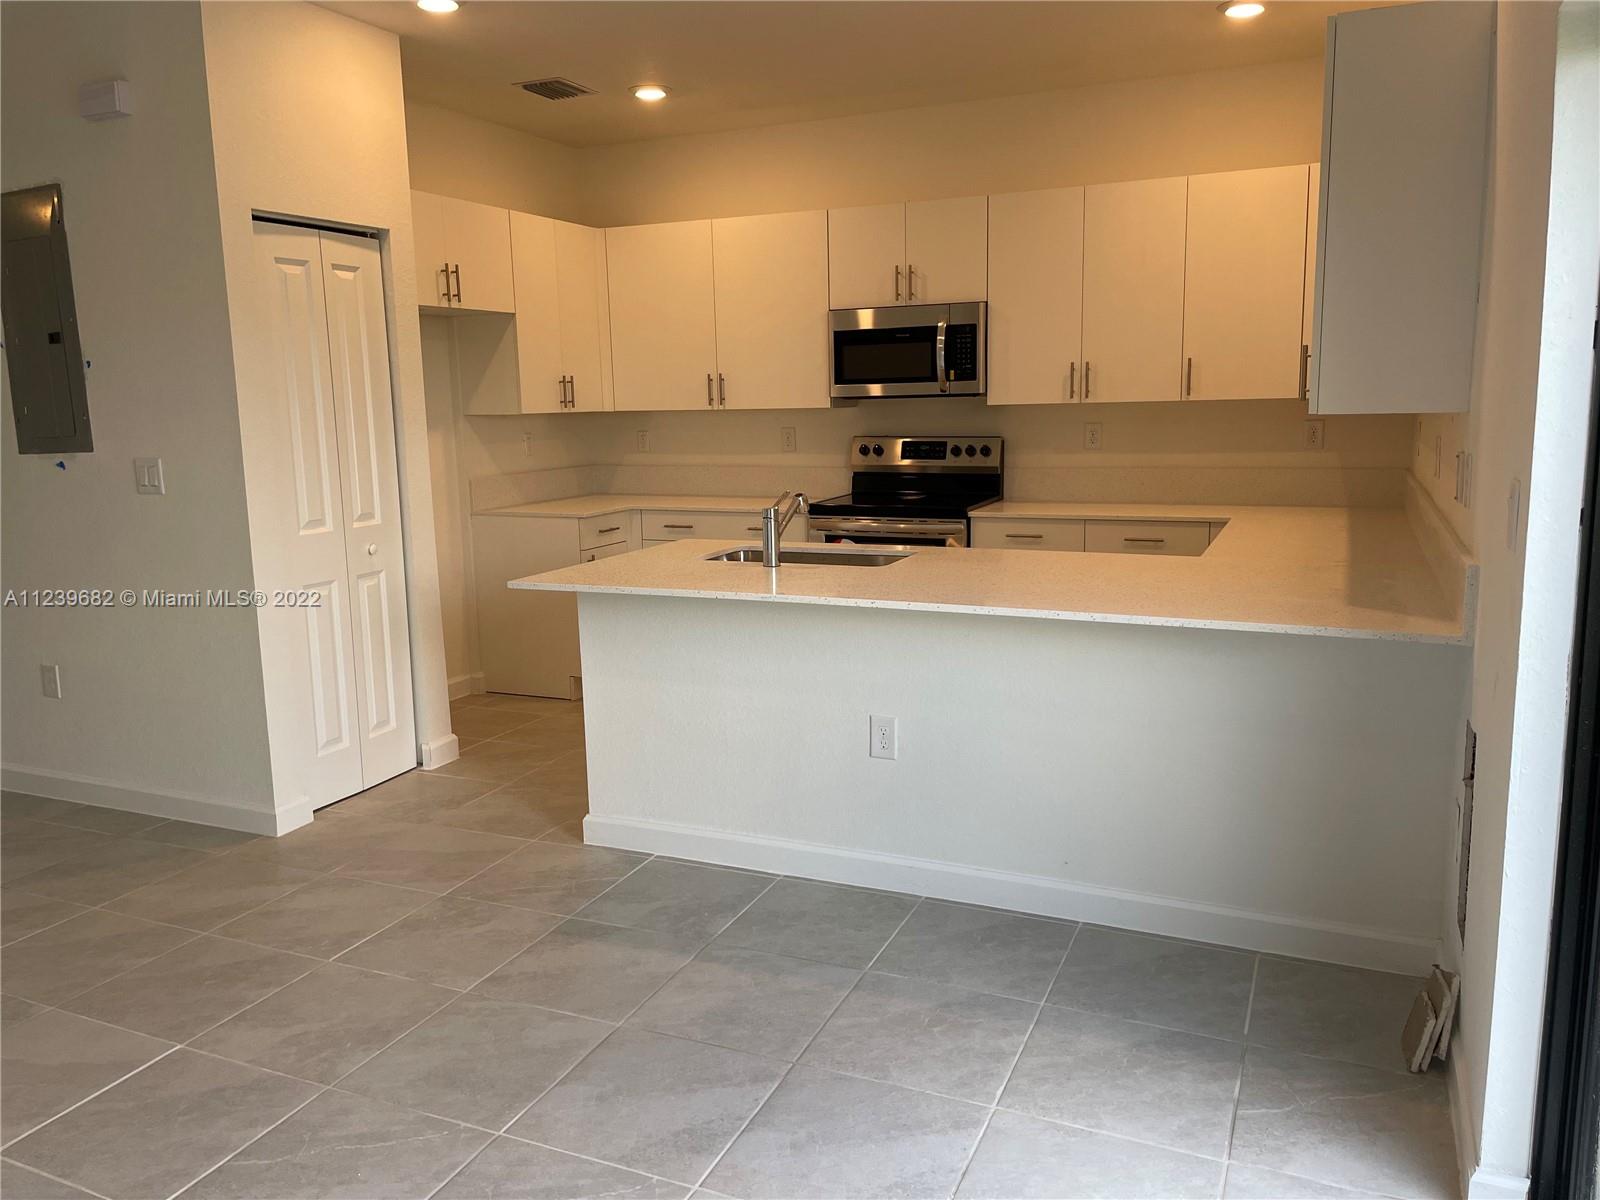 Brand new townhouse for rent! Be the first to live in this beautiful lake front townhouse. Enjoy a spacious backyard perfect for entertaining. The modern kitchen has stainless steel appliances and quartz countertops. Community will have a club house and community pool. Minutes away from the turnpike!